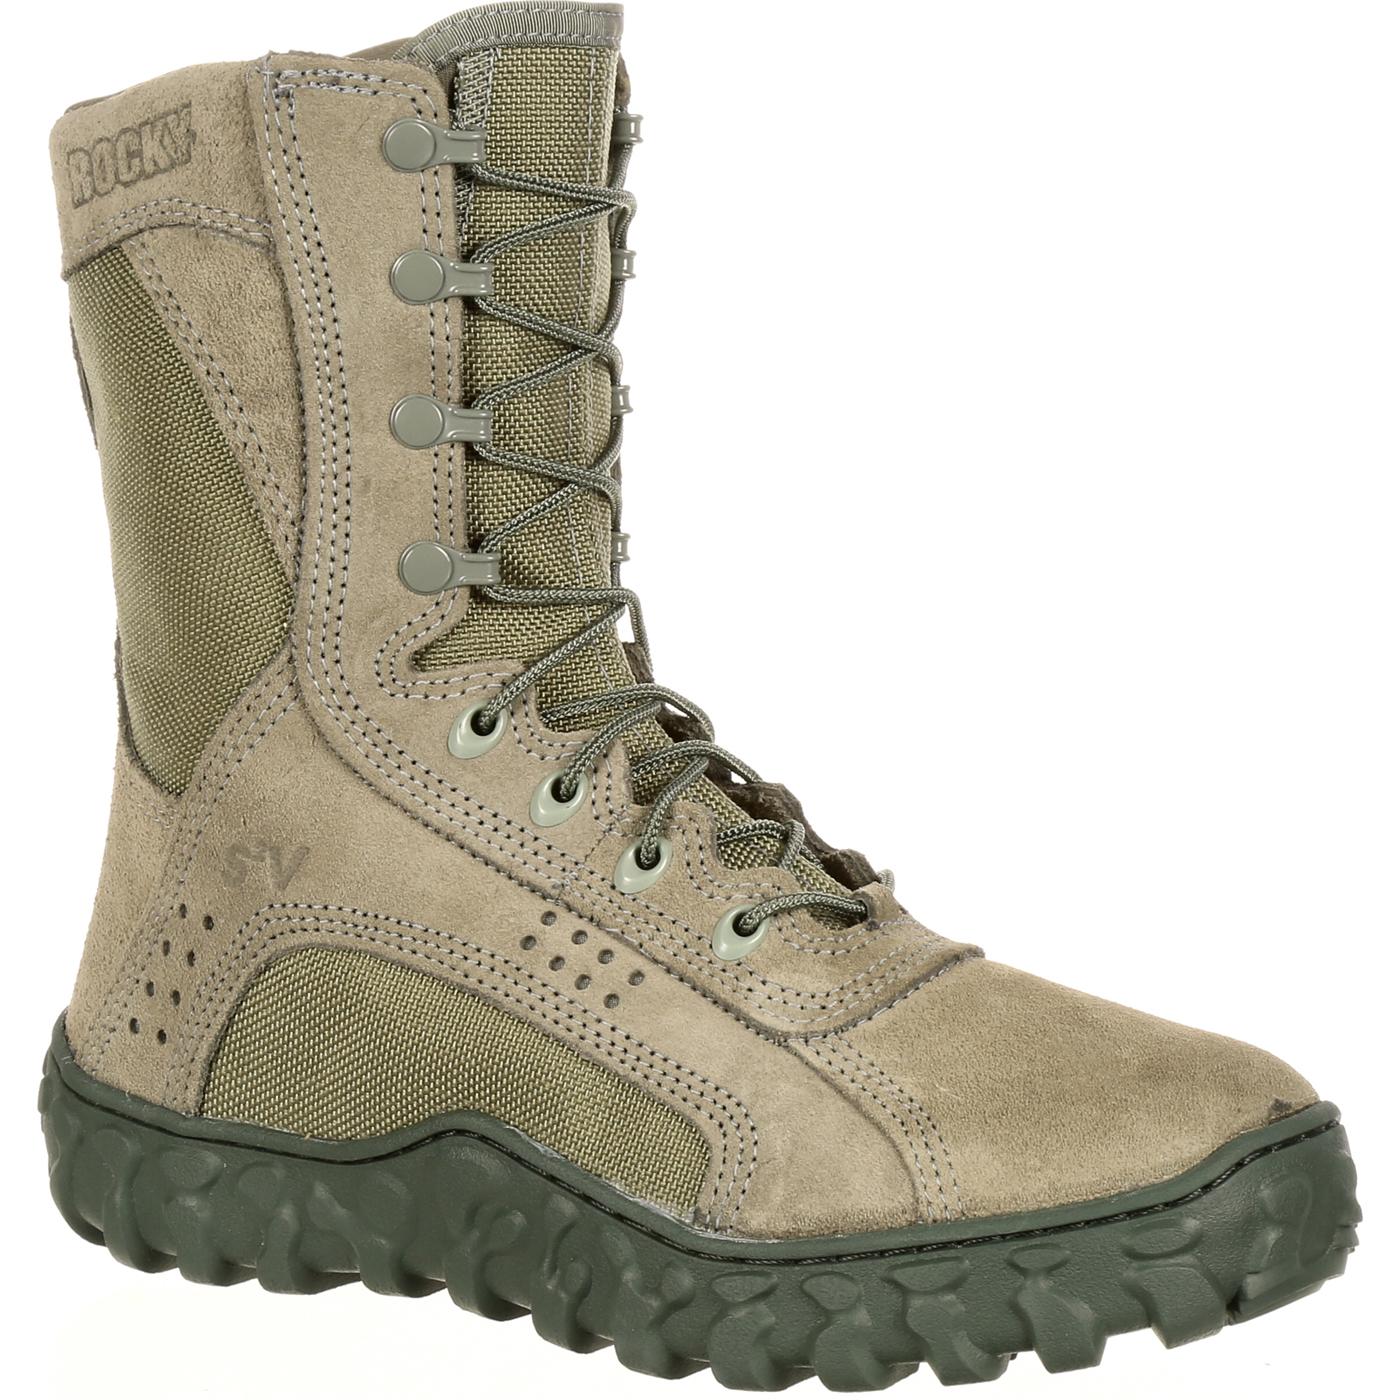 Rocky Boot S2V Sage Green Military Boot, style #FQ0000103